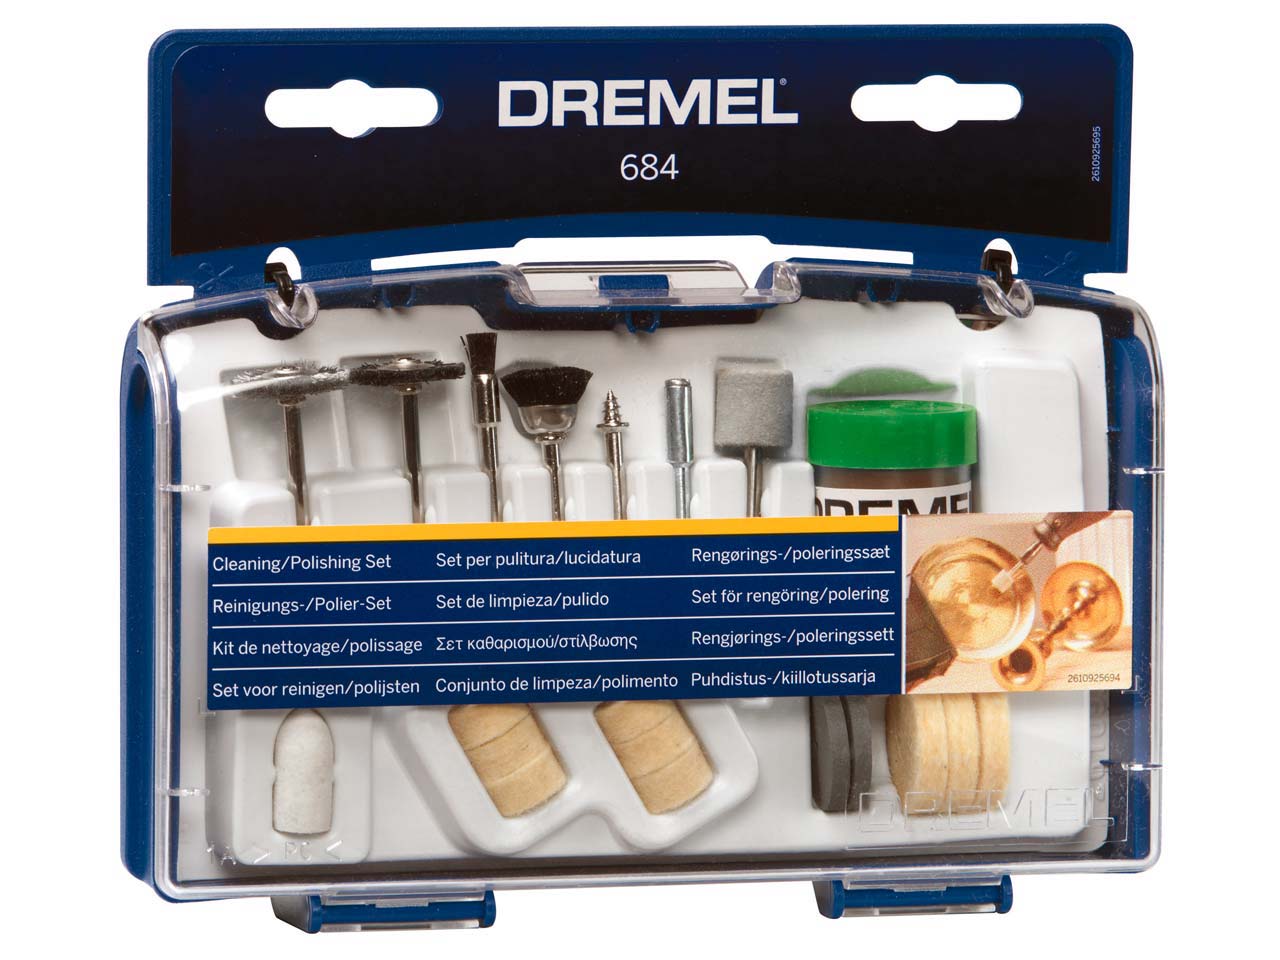 Dremel Cleaning Polishing Accessory Set Questions & Answers